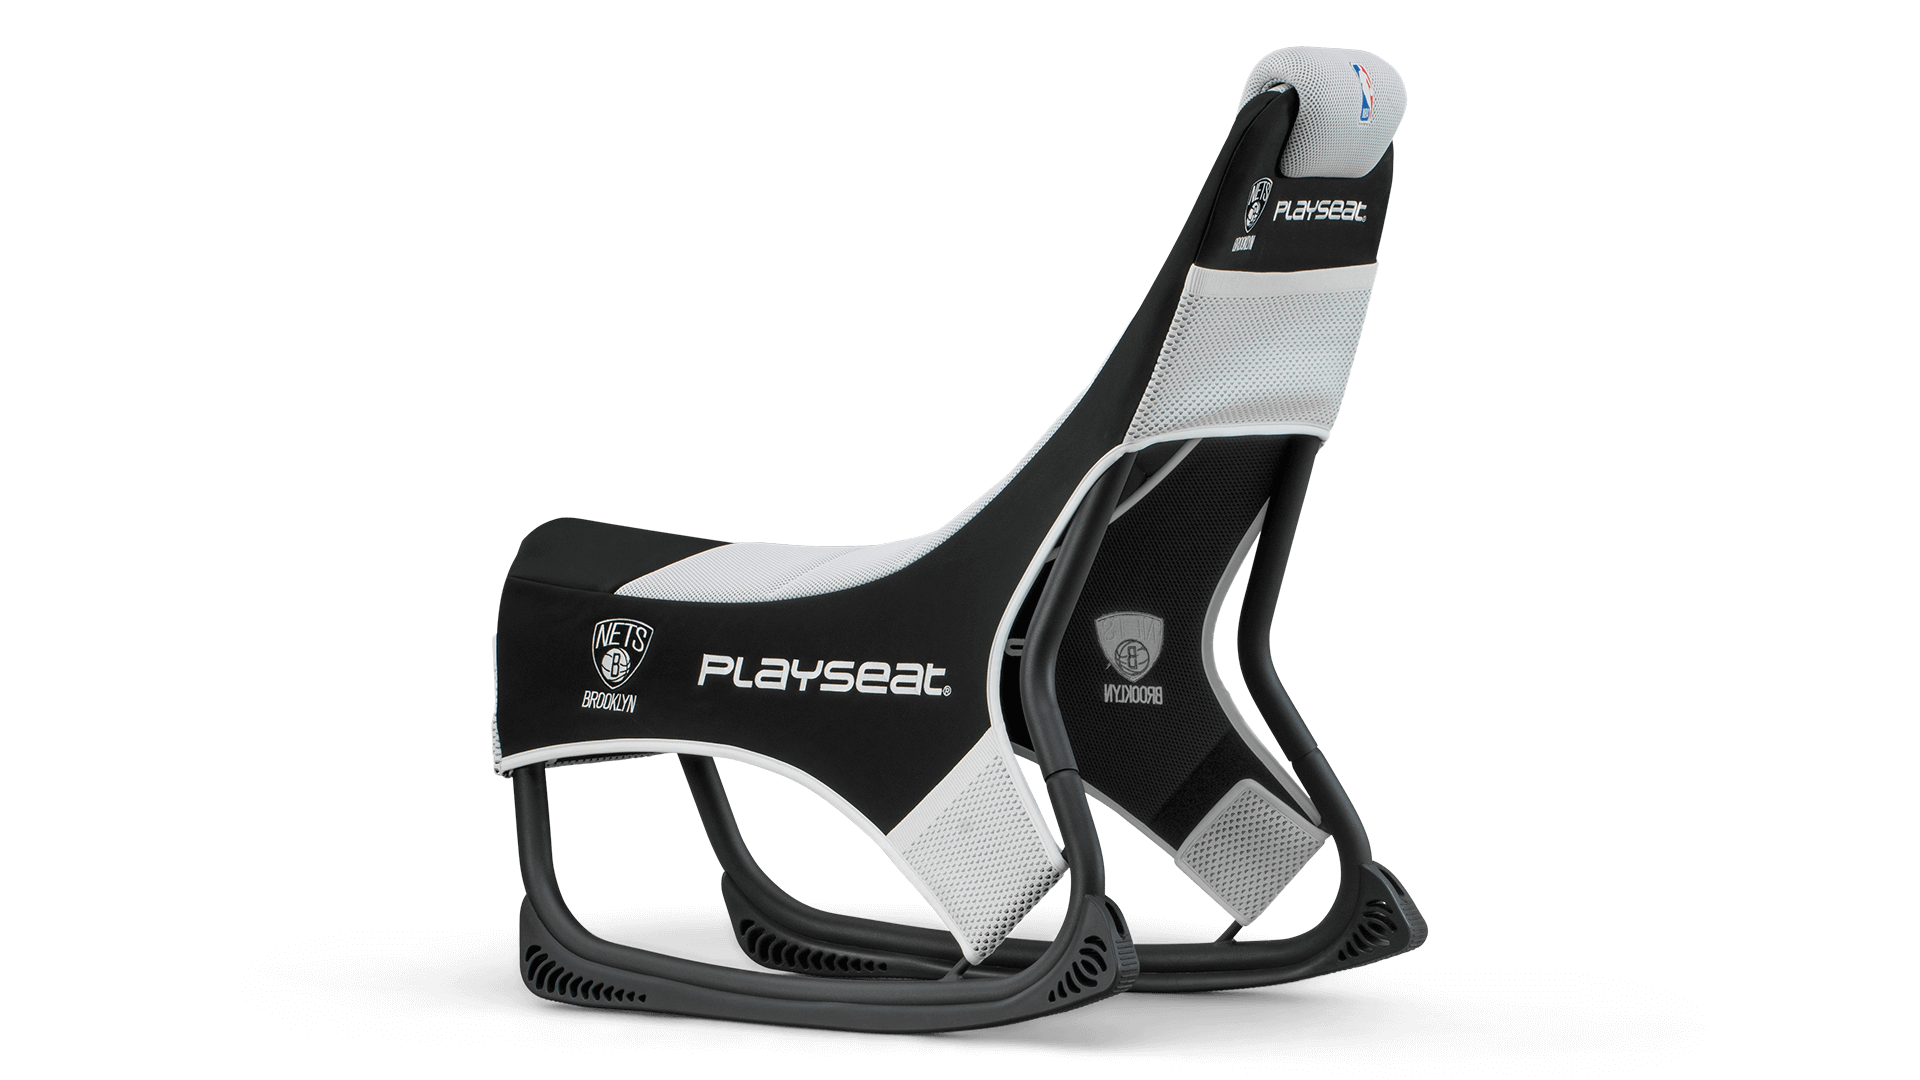 playseat-go-nba-brooklyn-nets-gaming-seat-back-angle-view-1920x1080.png